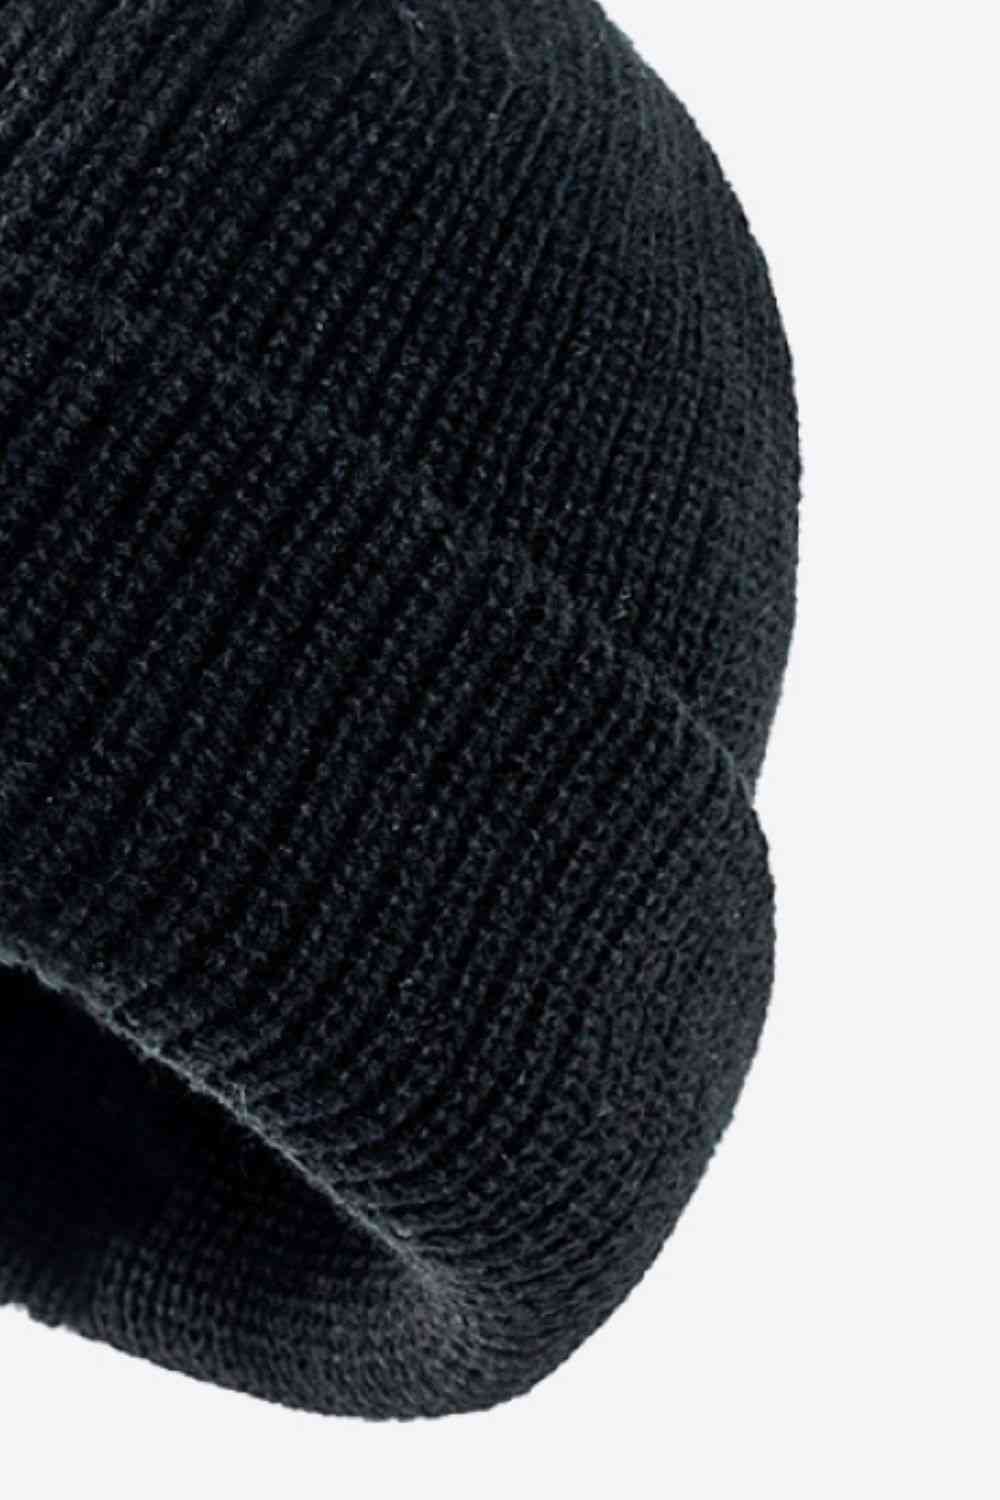 Black Calling For Winter Rib-Knit Beanie Winter Accessories